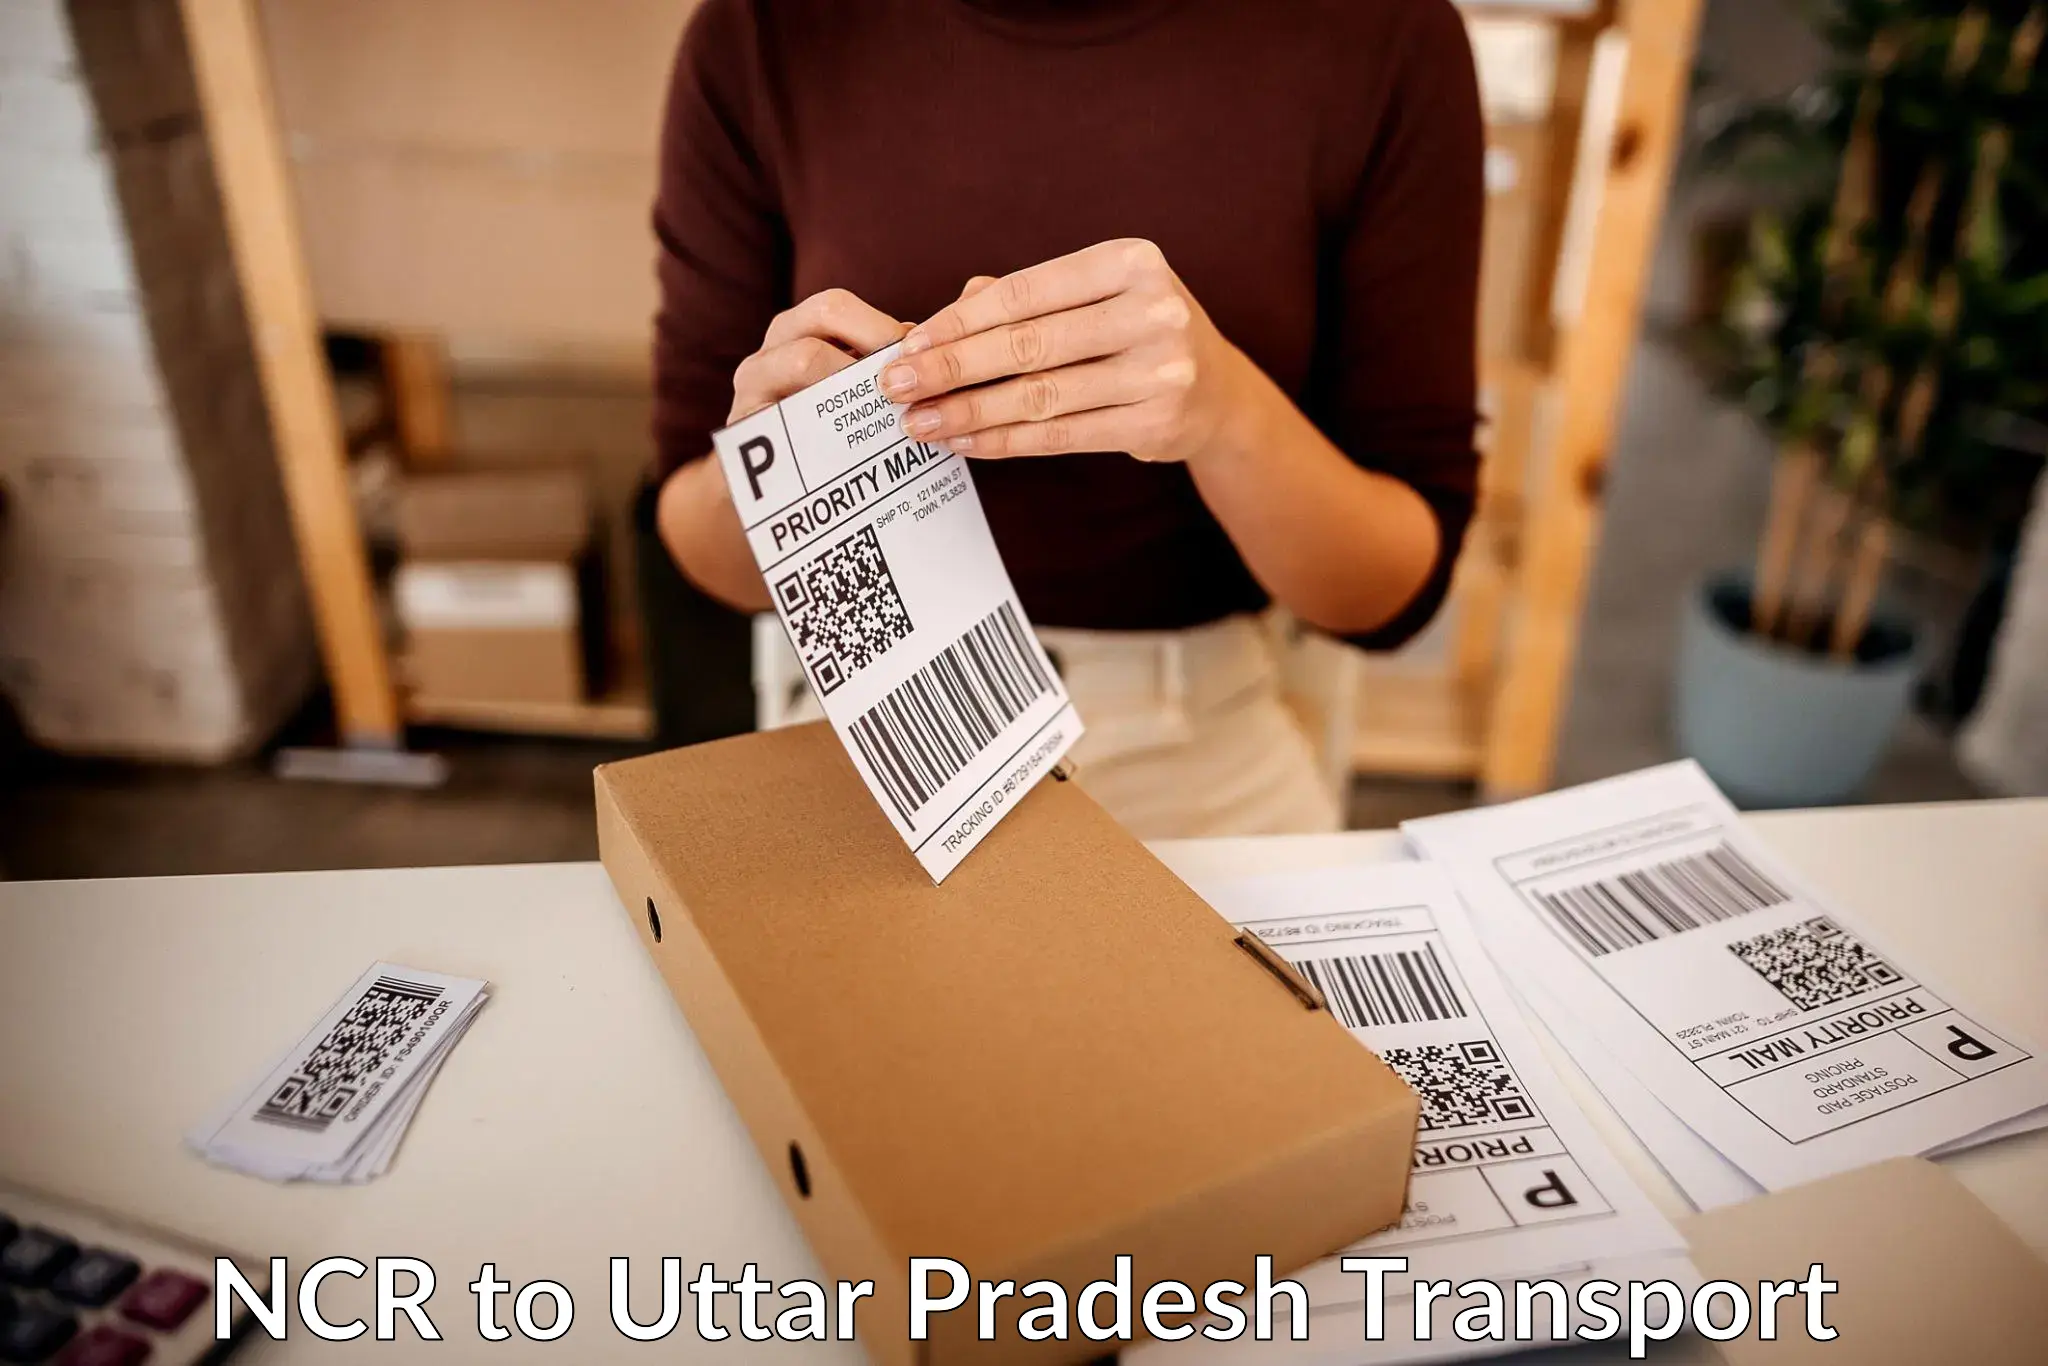 Vehicle transport services NCR to Ayodhya